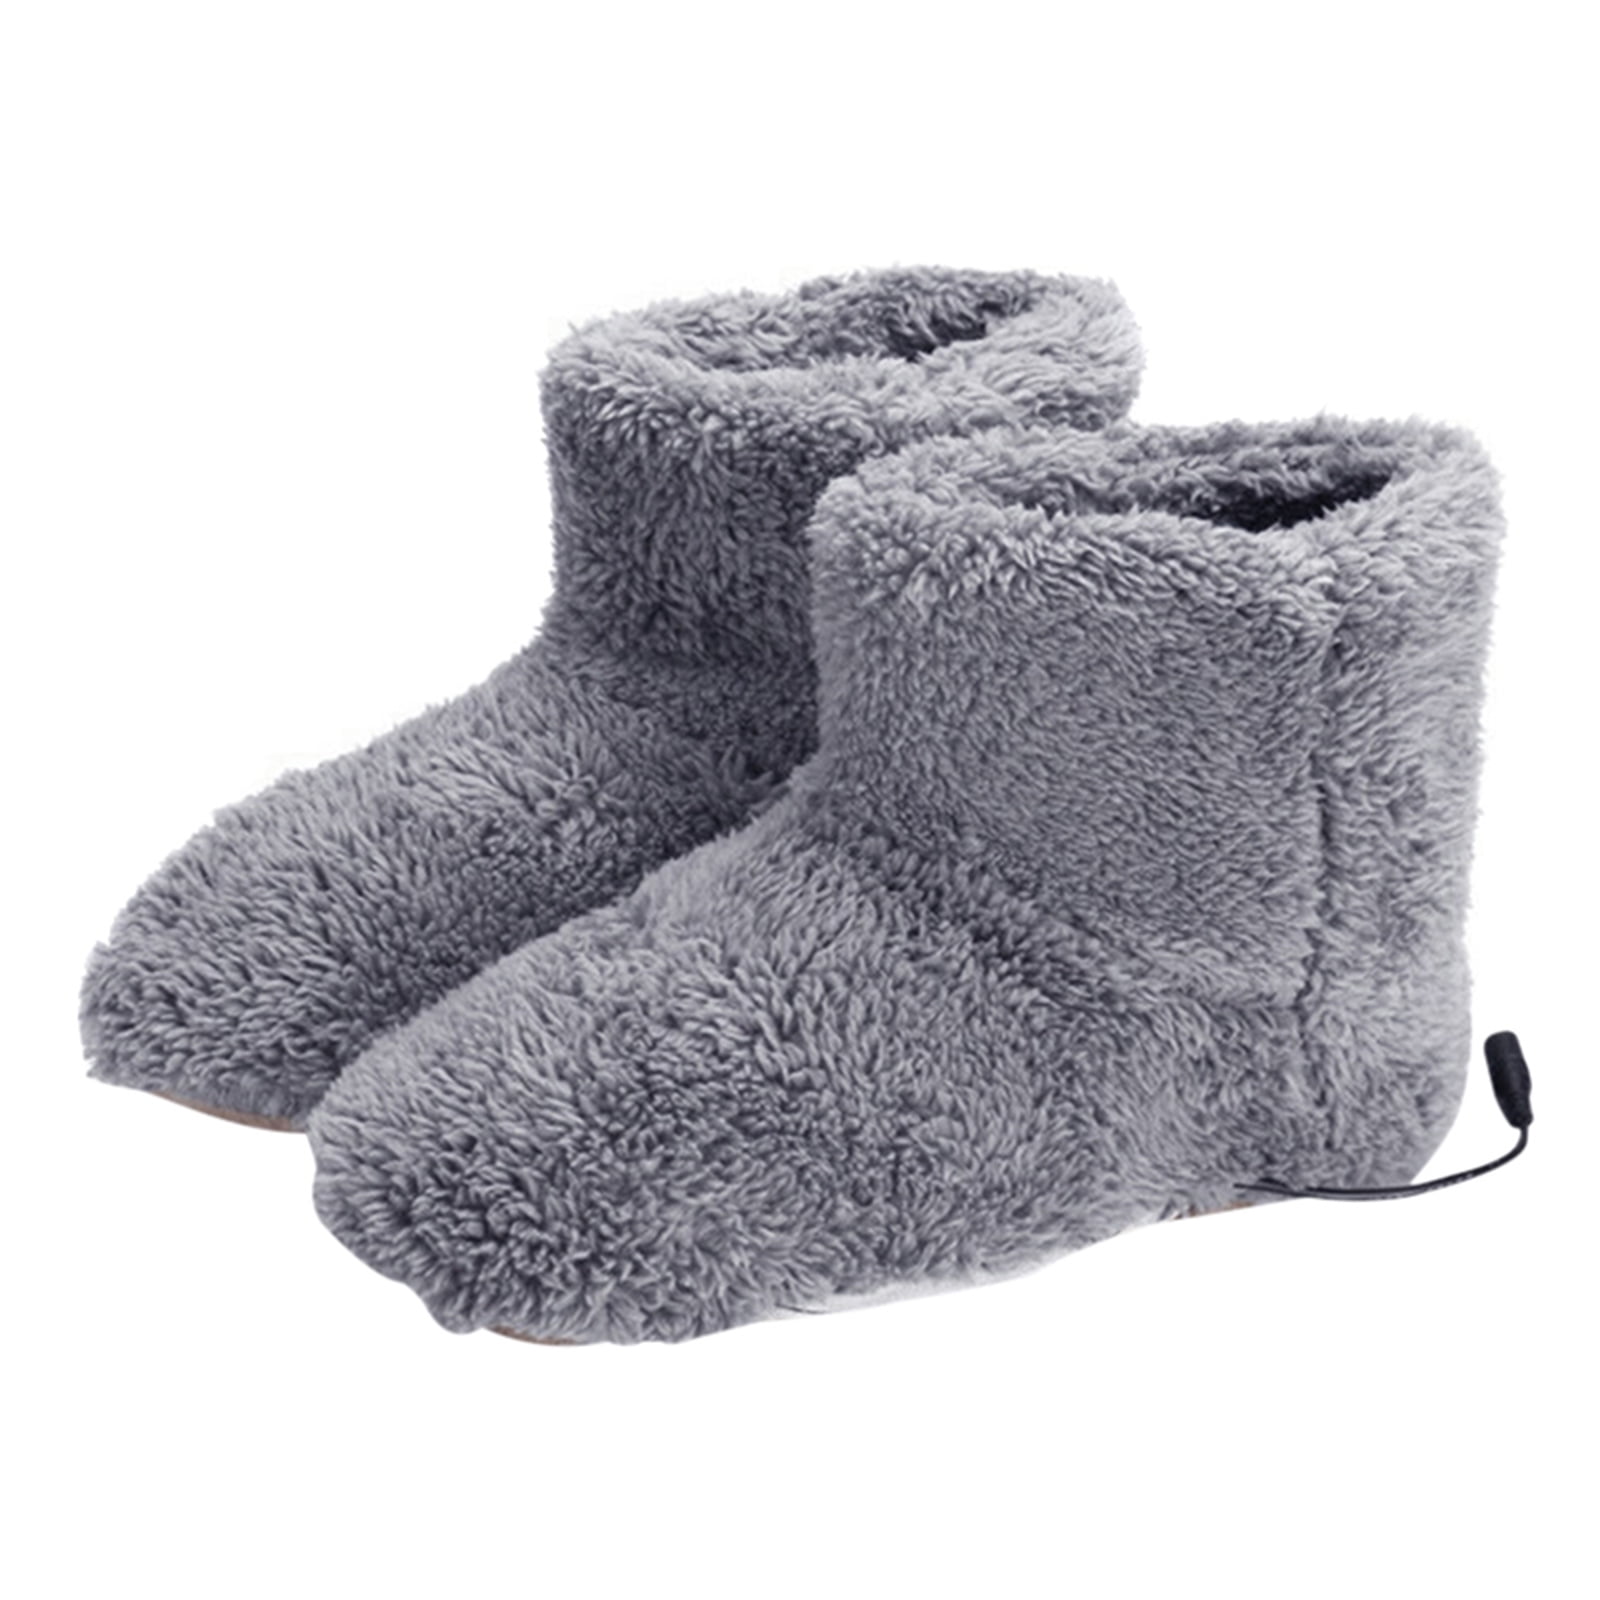 Details about   Winter USB Warmer Foot Shoes Plush Warm Electric Slipper Feet Heat Washable 